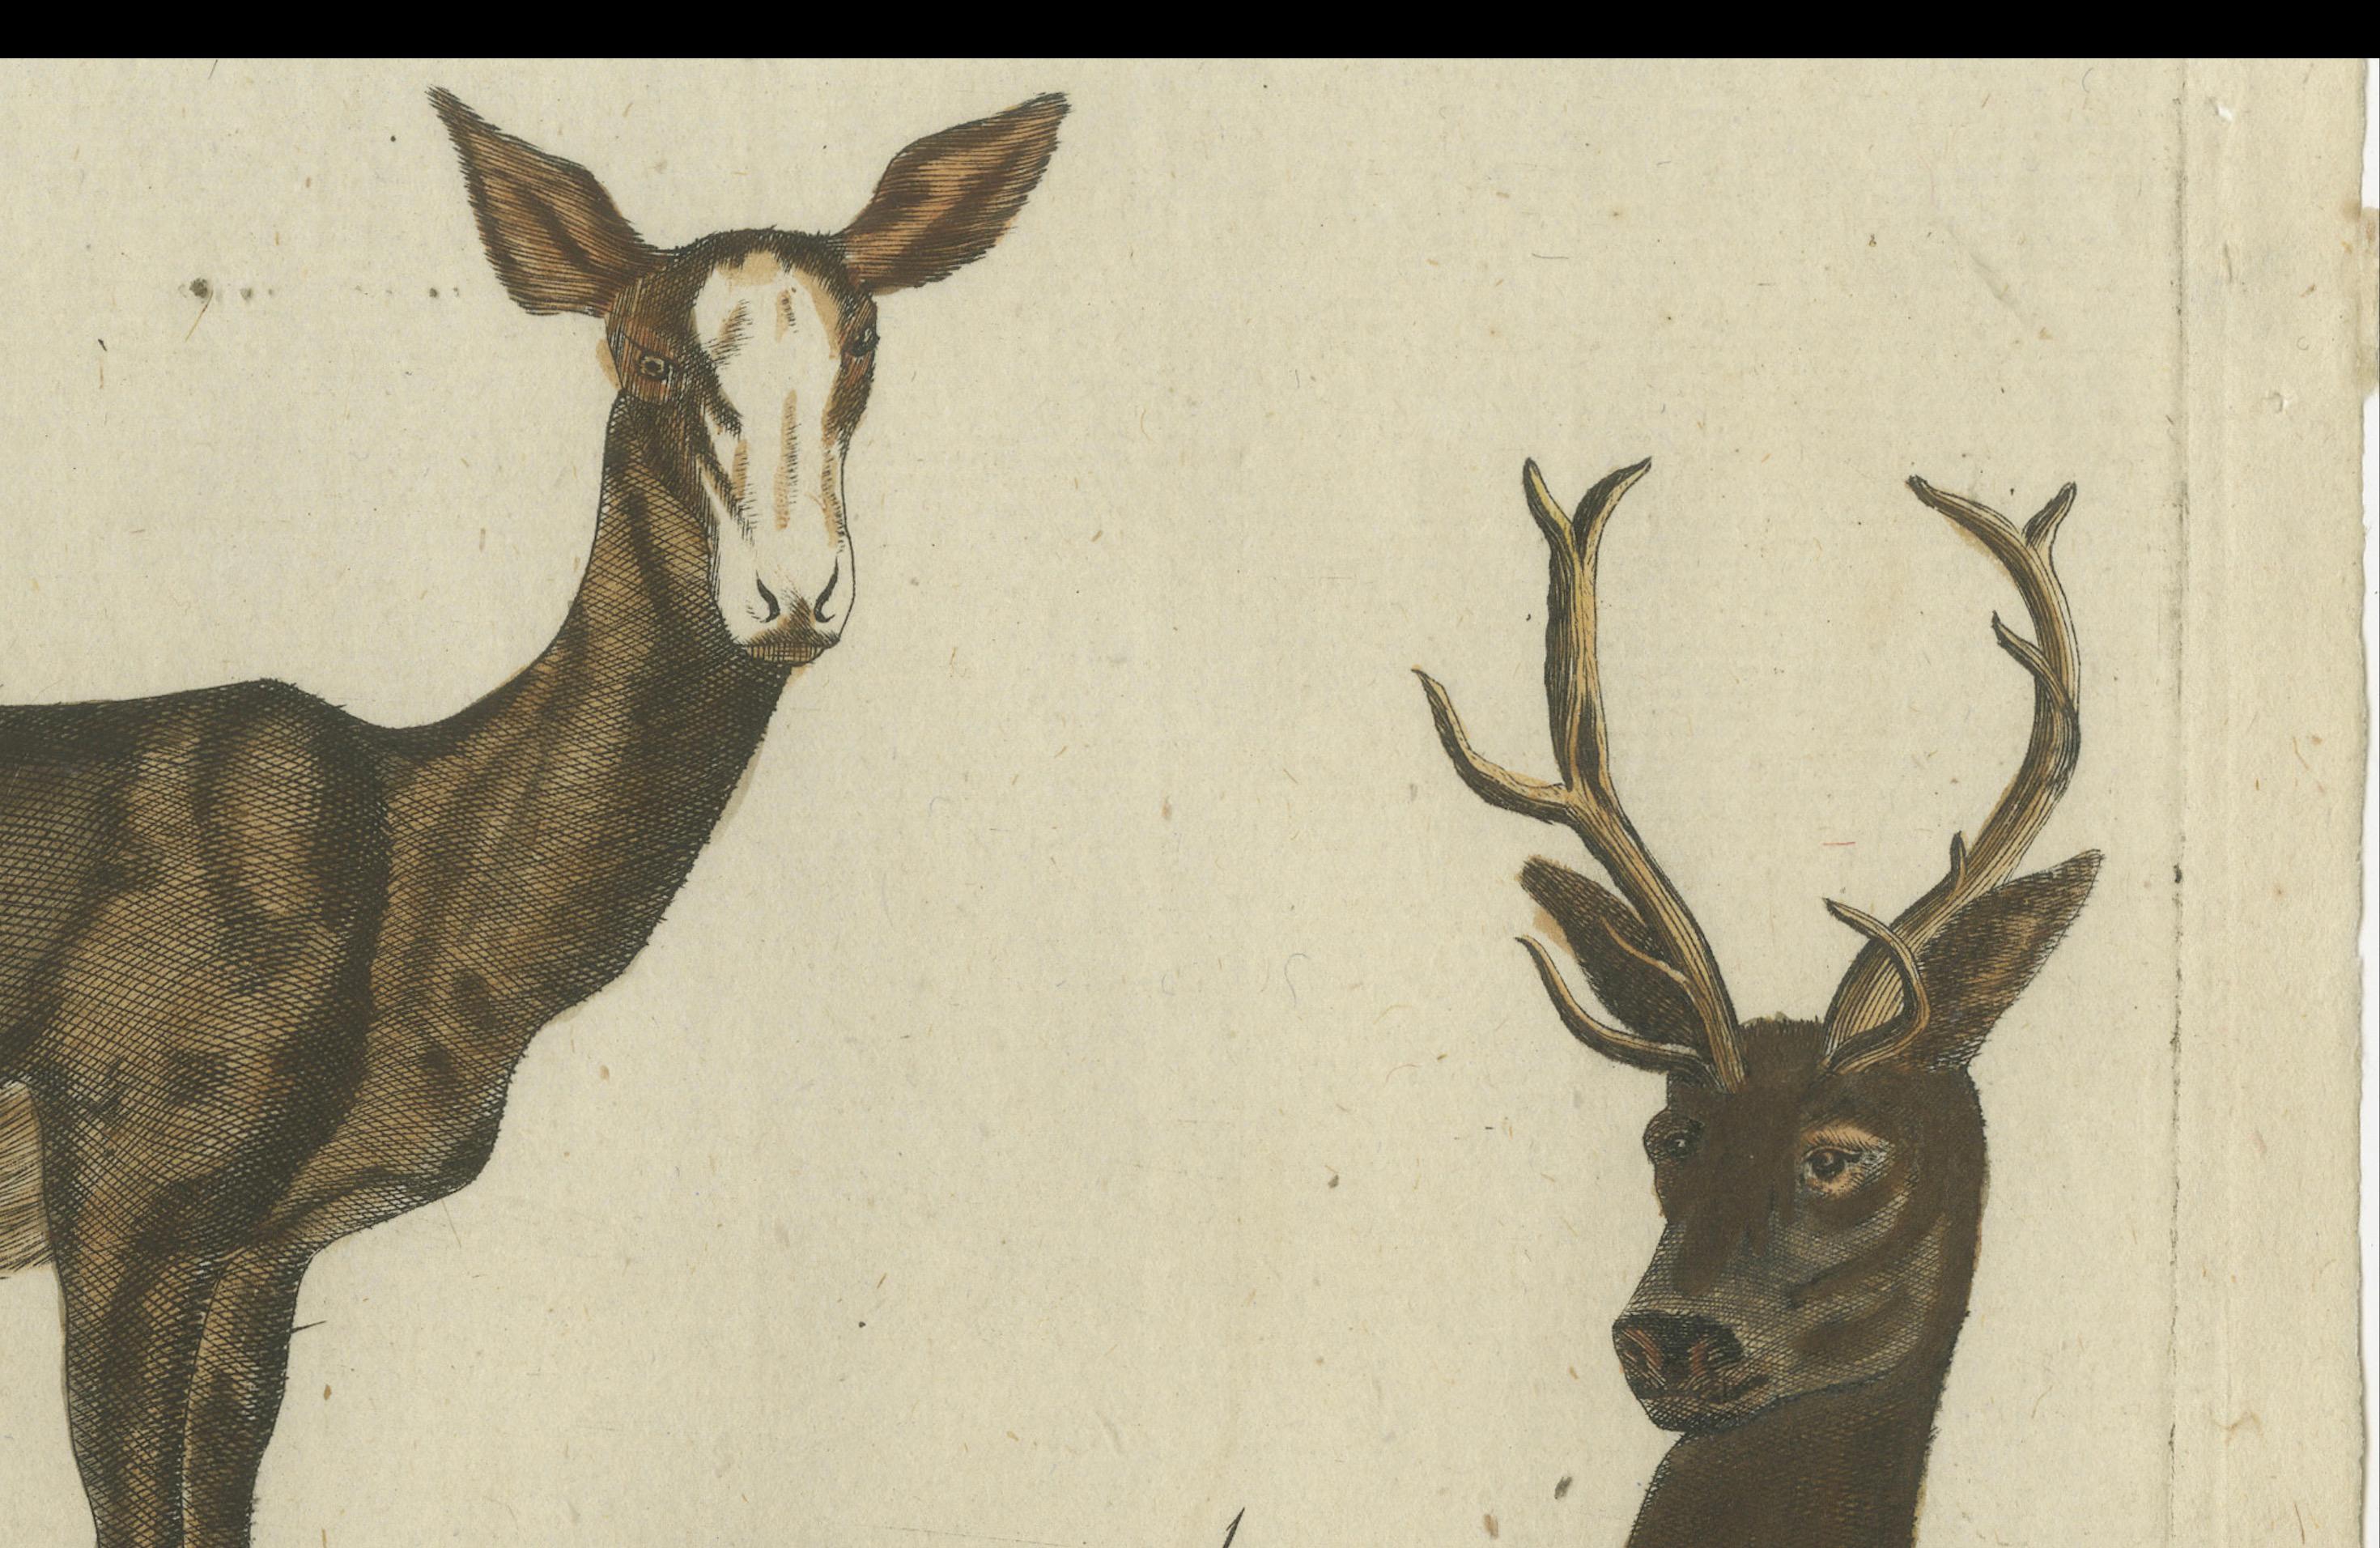 Original antique print of two deer. his engraved print originates from a very rare unknown Dutch work. The plates are similar to the plates in the famous German work: ‘Bilderbuch fur Kinder' by F.J. Bertuch, published 1790-1830 in Weimar. This could